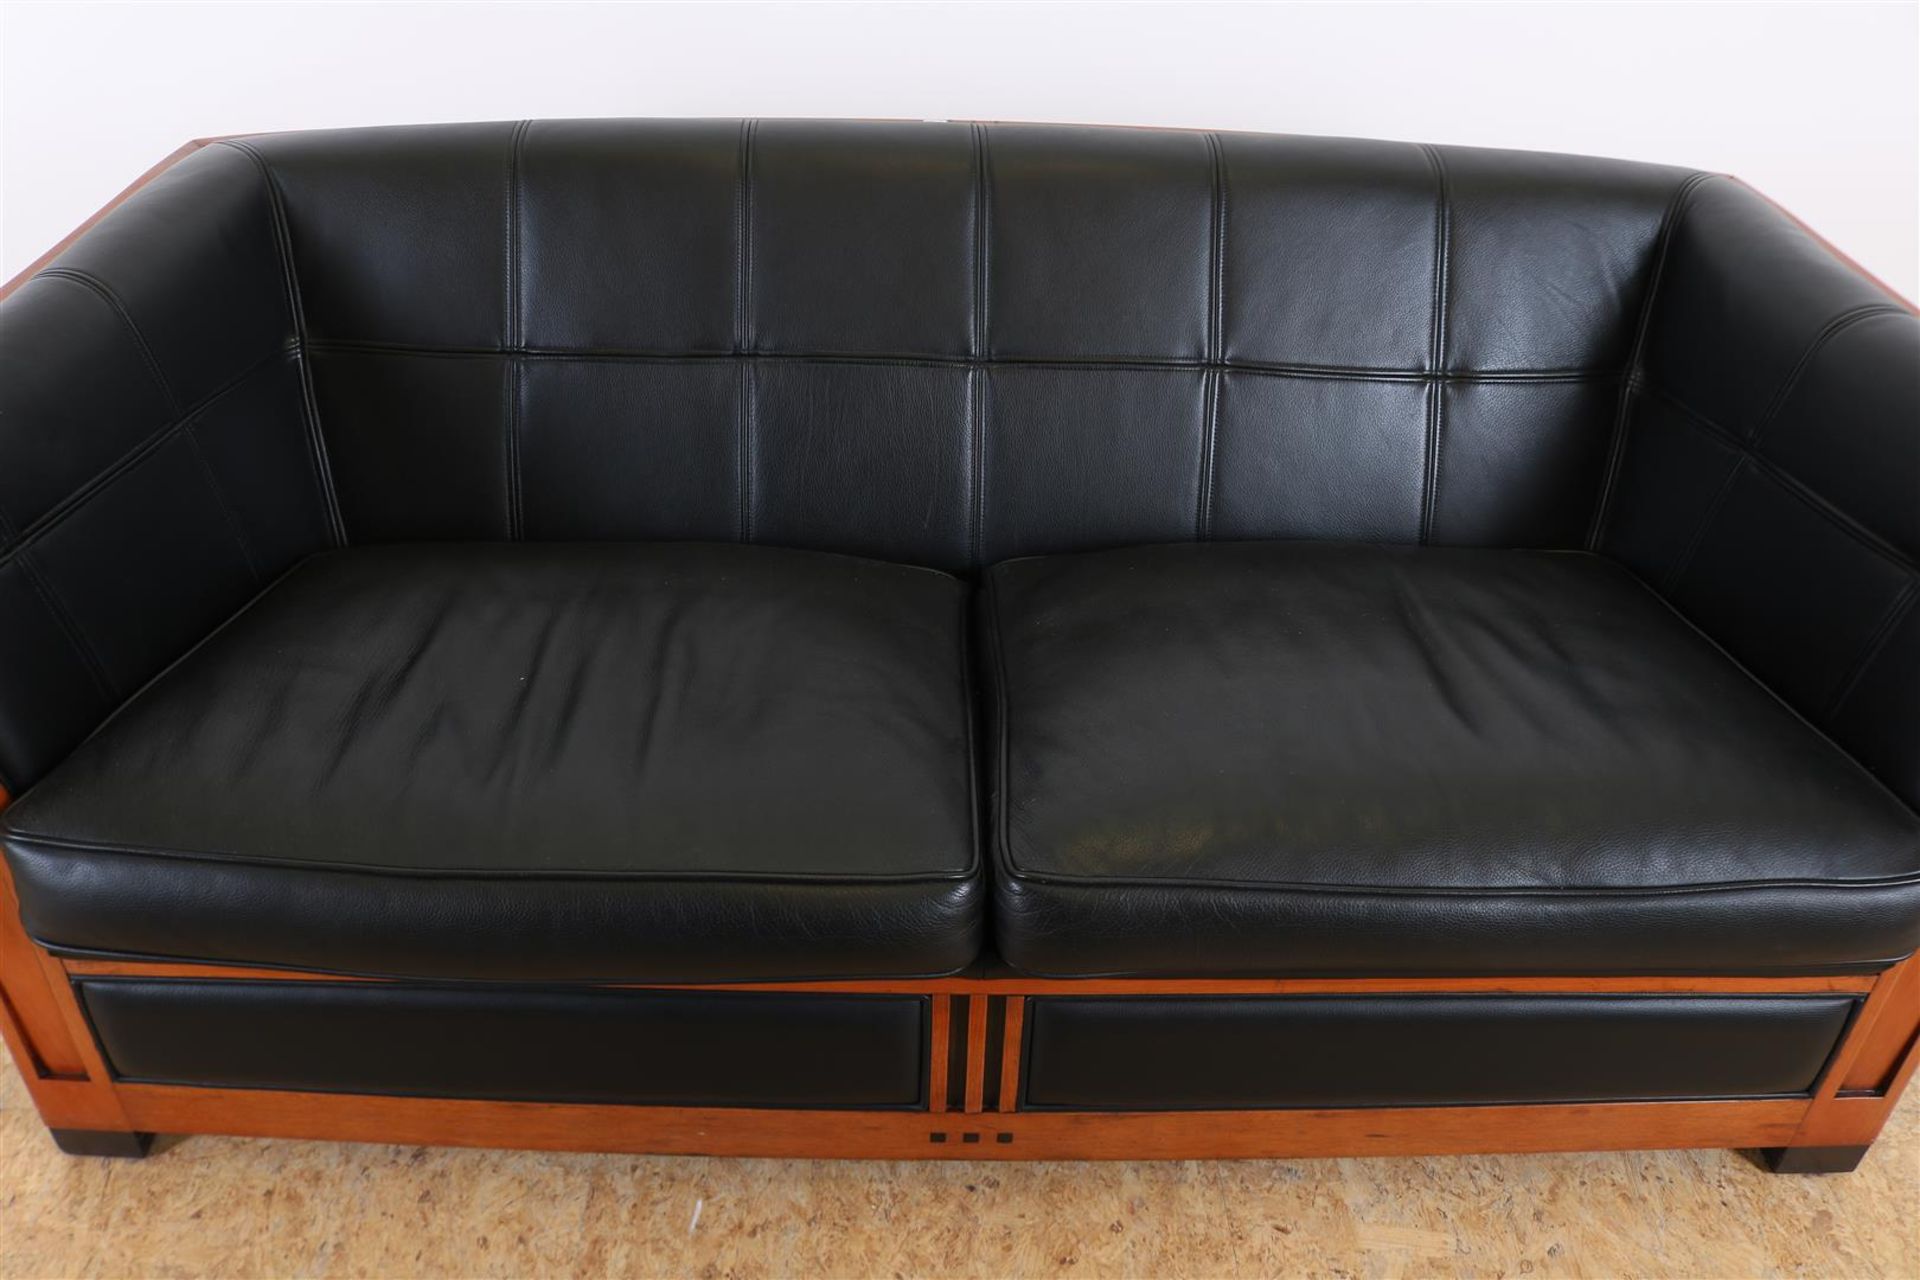 Oak Schuitema decoforma 2-seater sofa with black leather upholstery, model Lawrence, h. 71, w. - Image 2 of 5